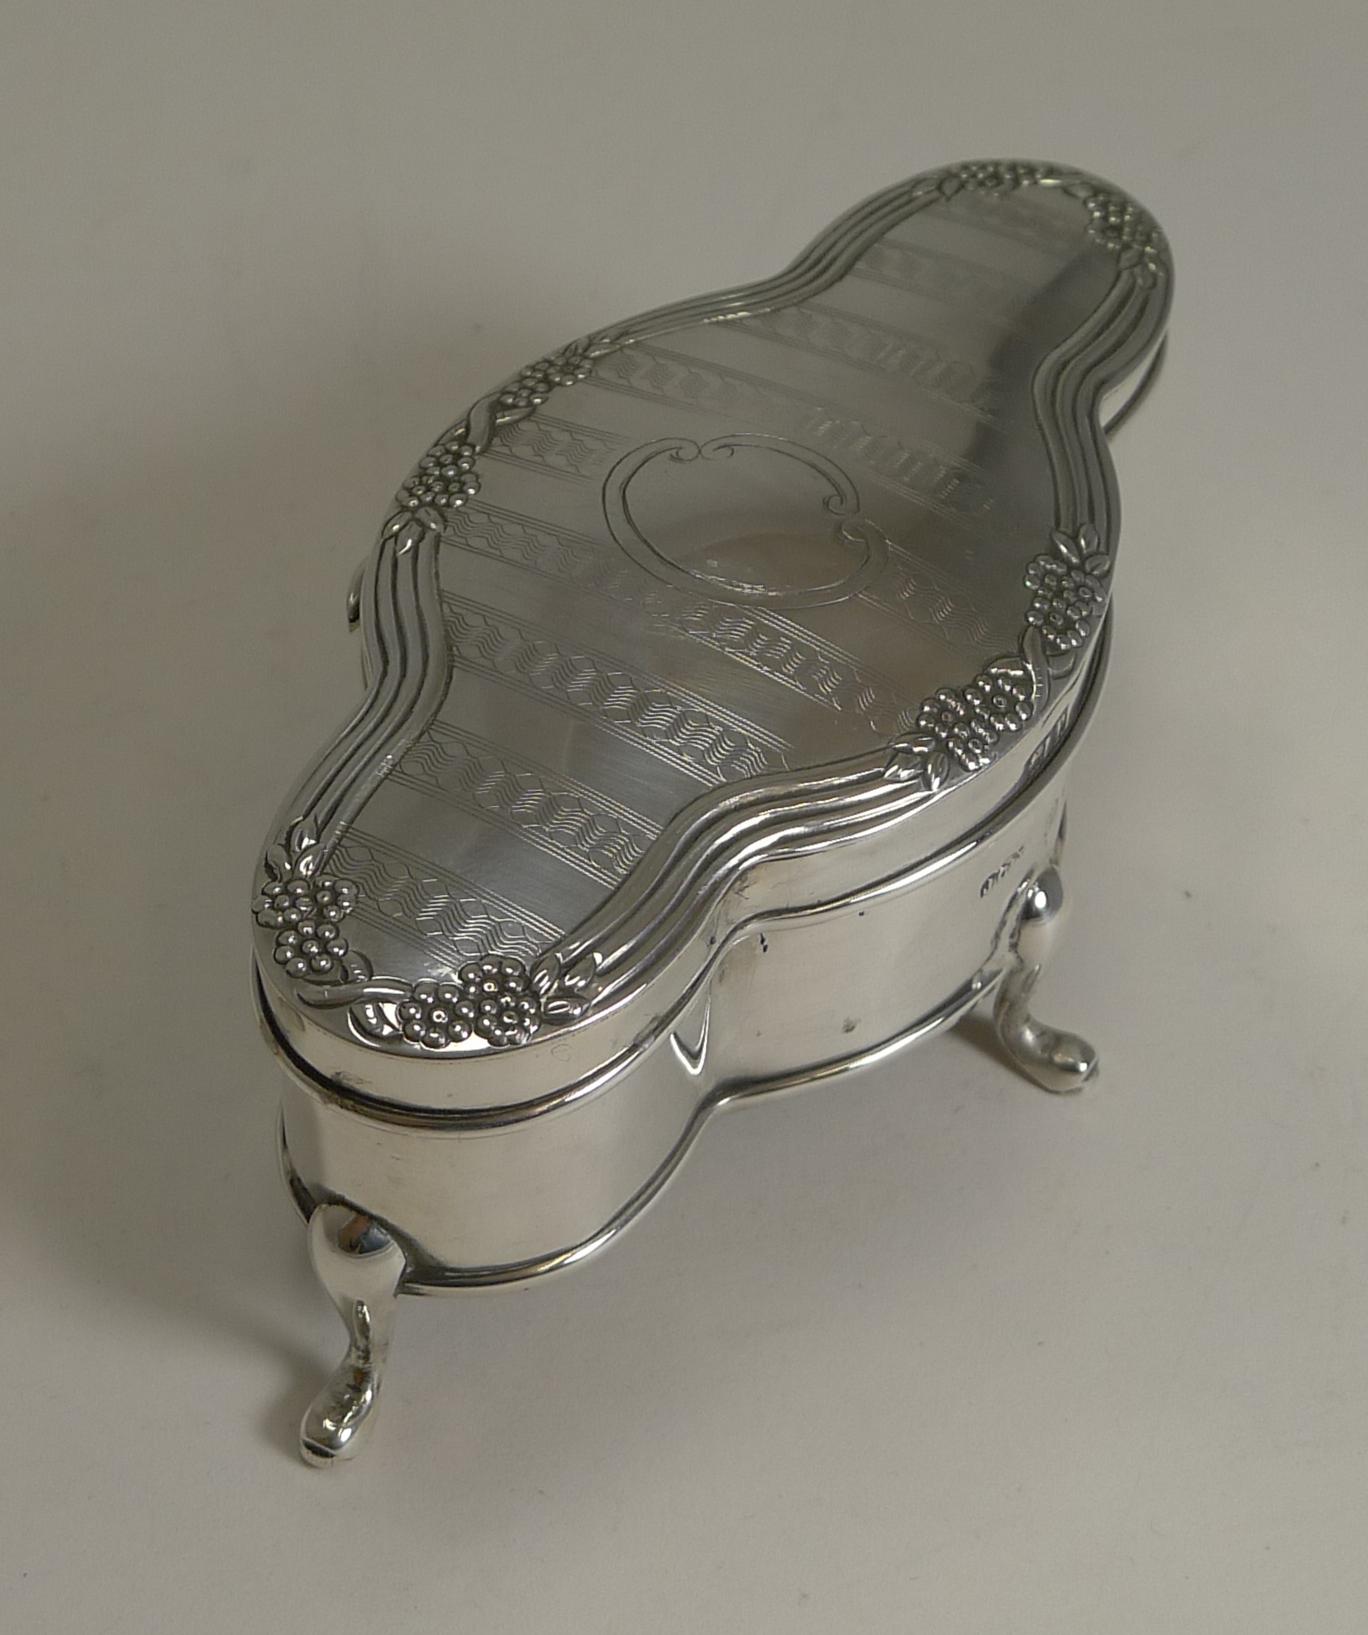 Early 20th Century Antique English Sterling Silver Jewelry or Ring Box, 1914